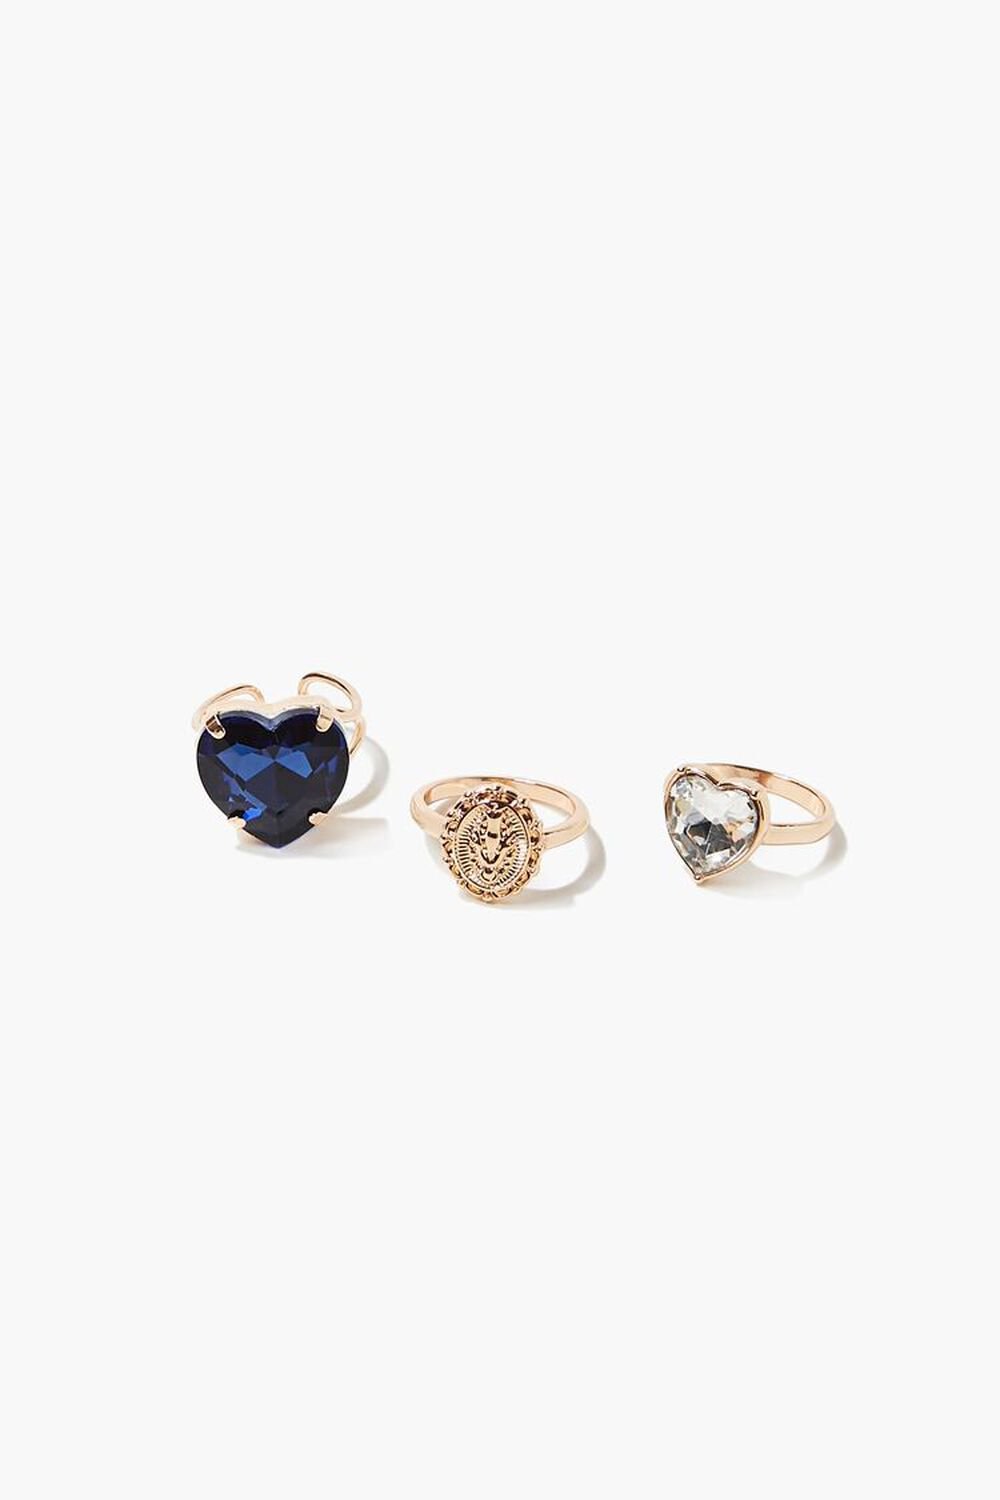 GOLD Faux Sapphire Heart Charm Ring Set, image 1